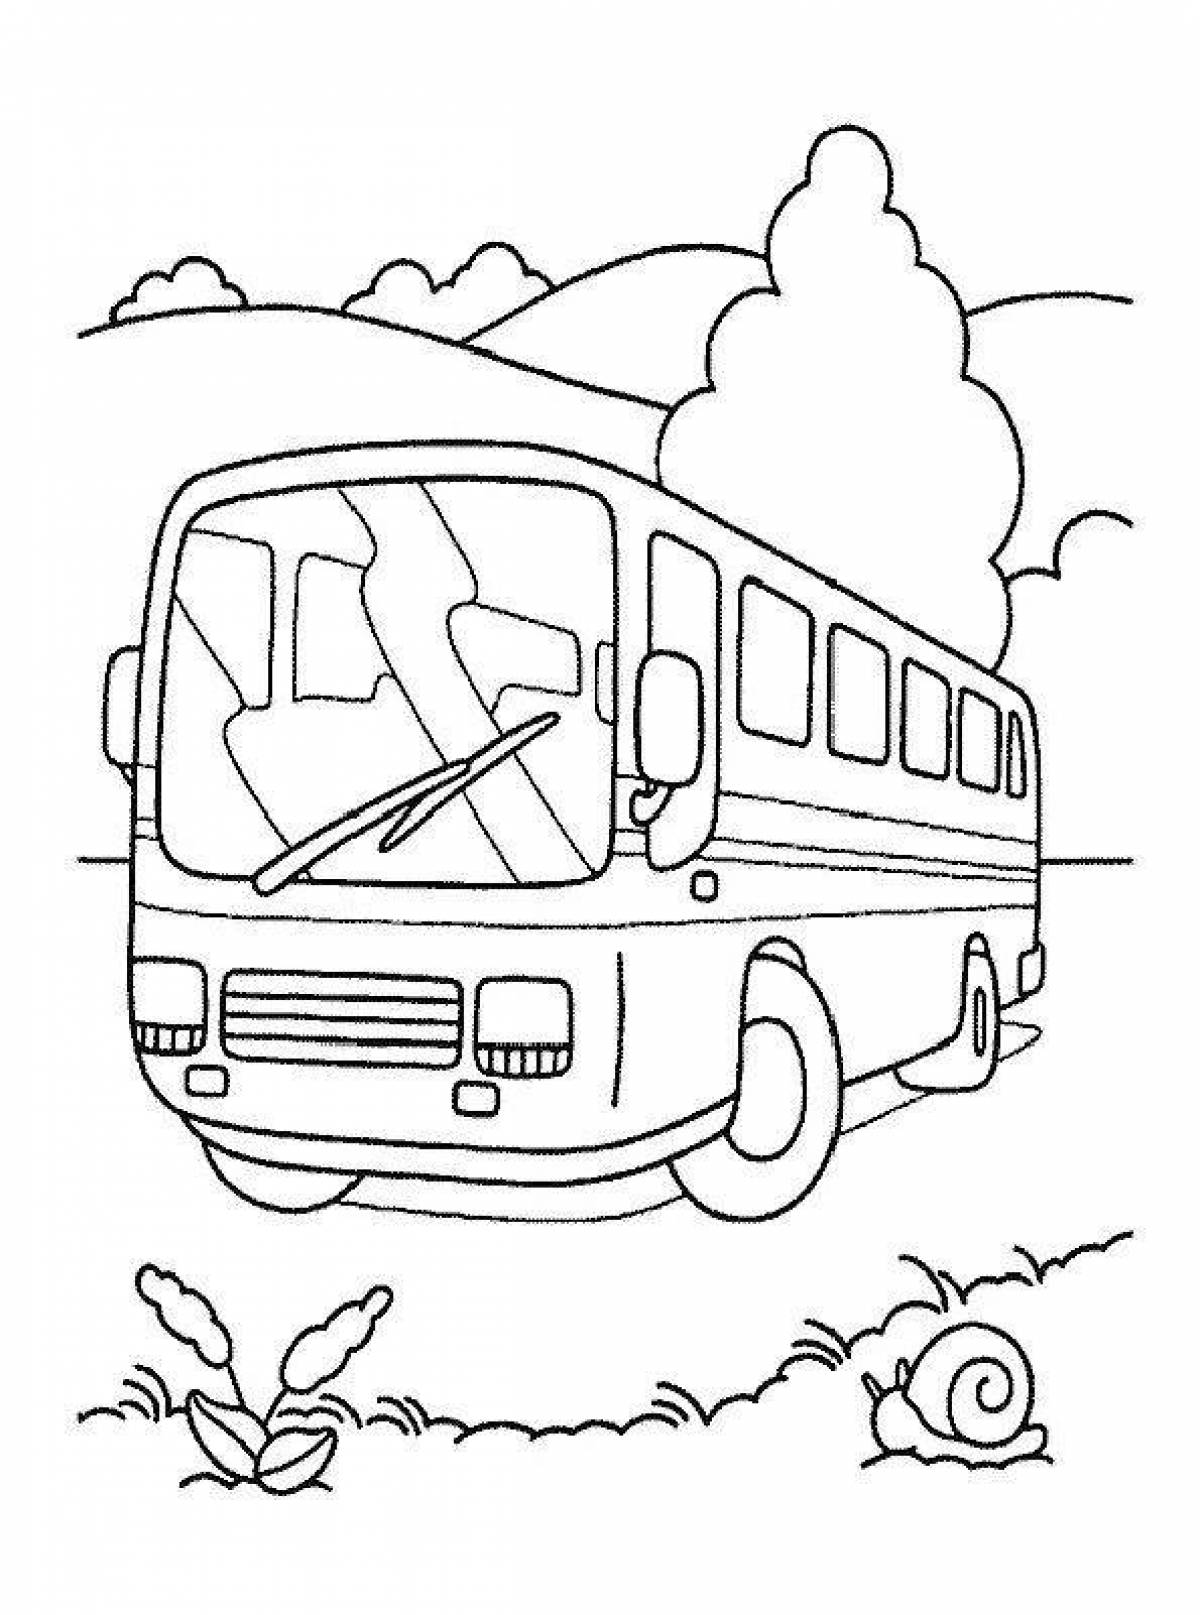 Playful public transport coloring page